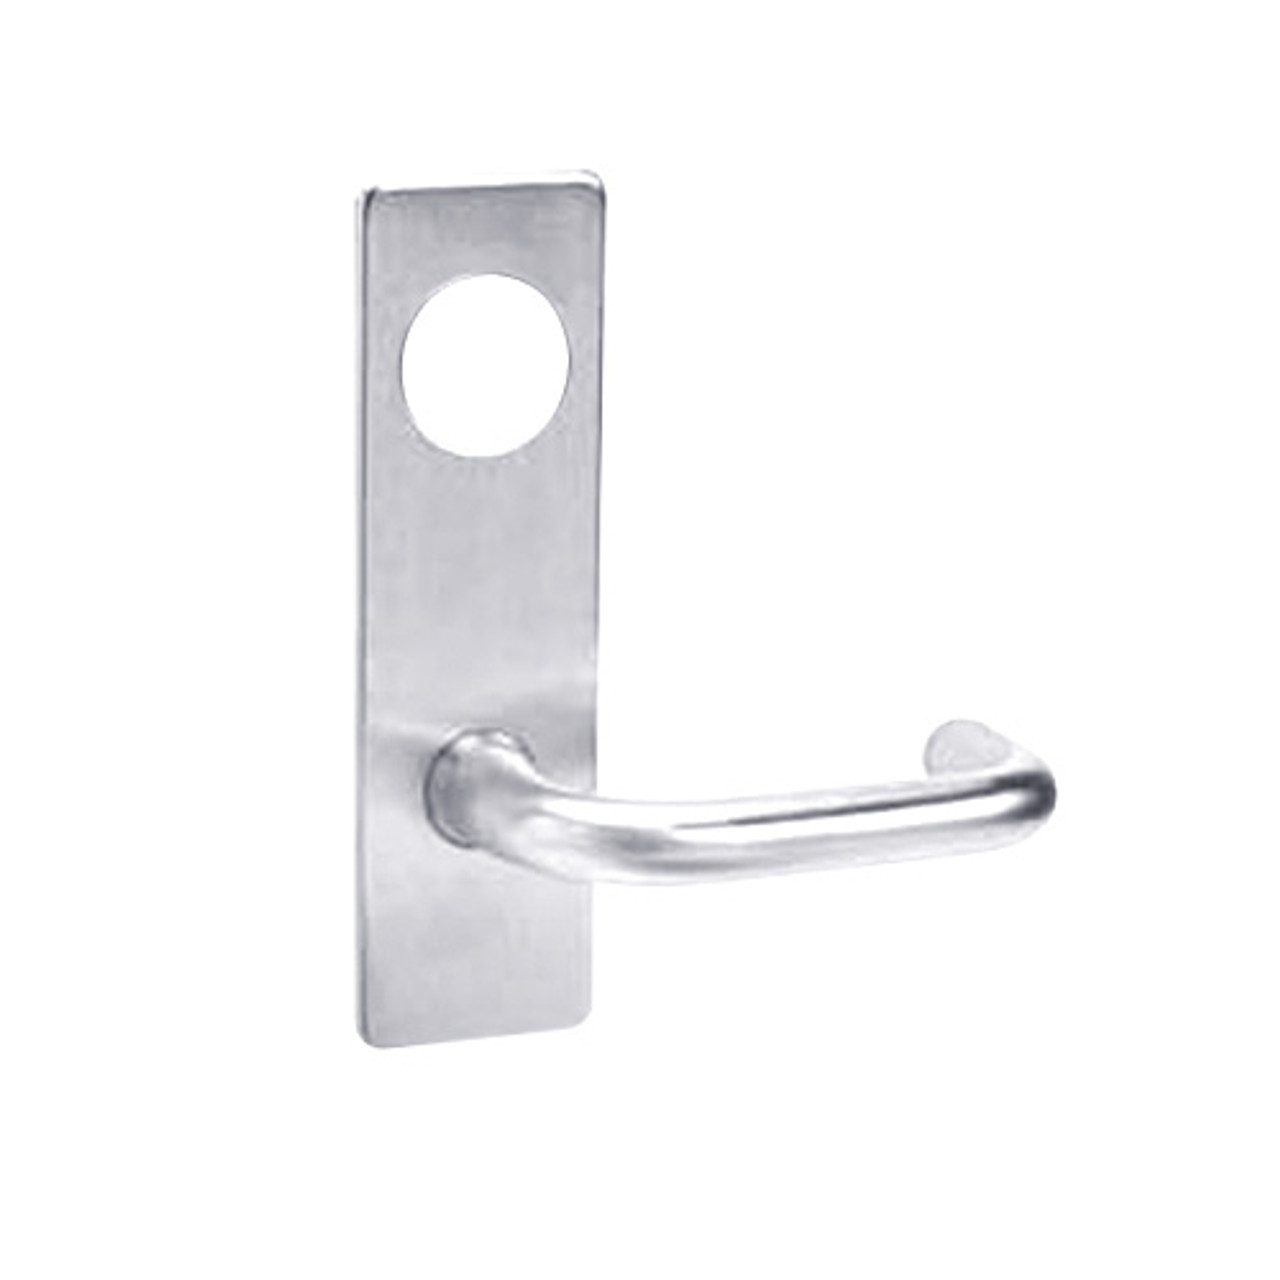 ML2054-LWM-625-CL6 Corbin Russwin ML2000 Series IC 6-Pin Less Core Mortise Entrance Locksets with Lustra Lever in Bright Chrome